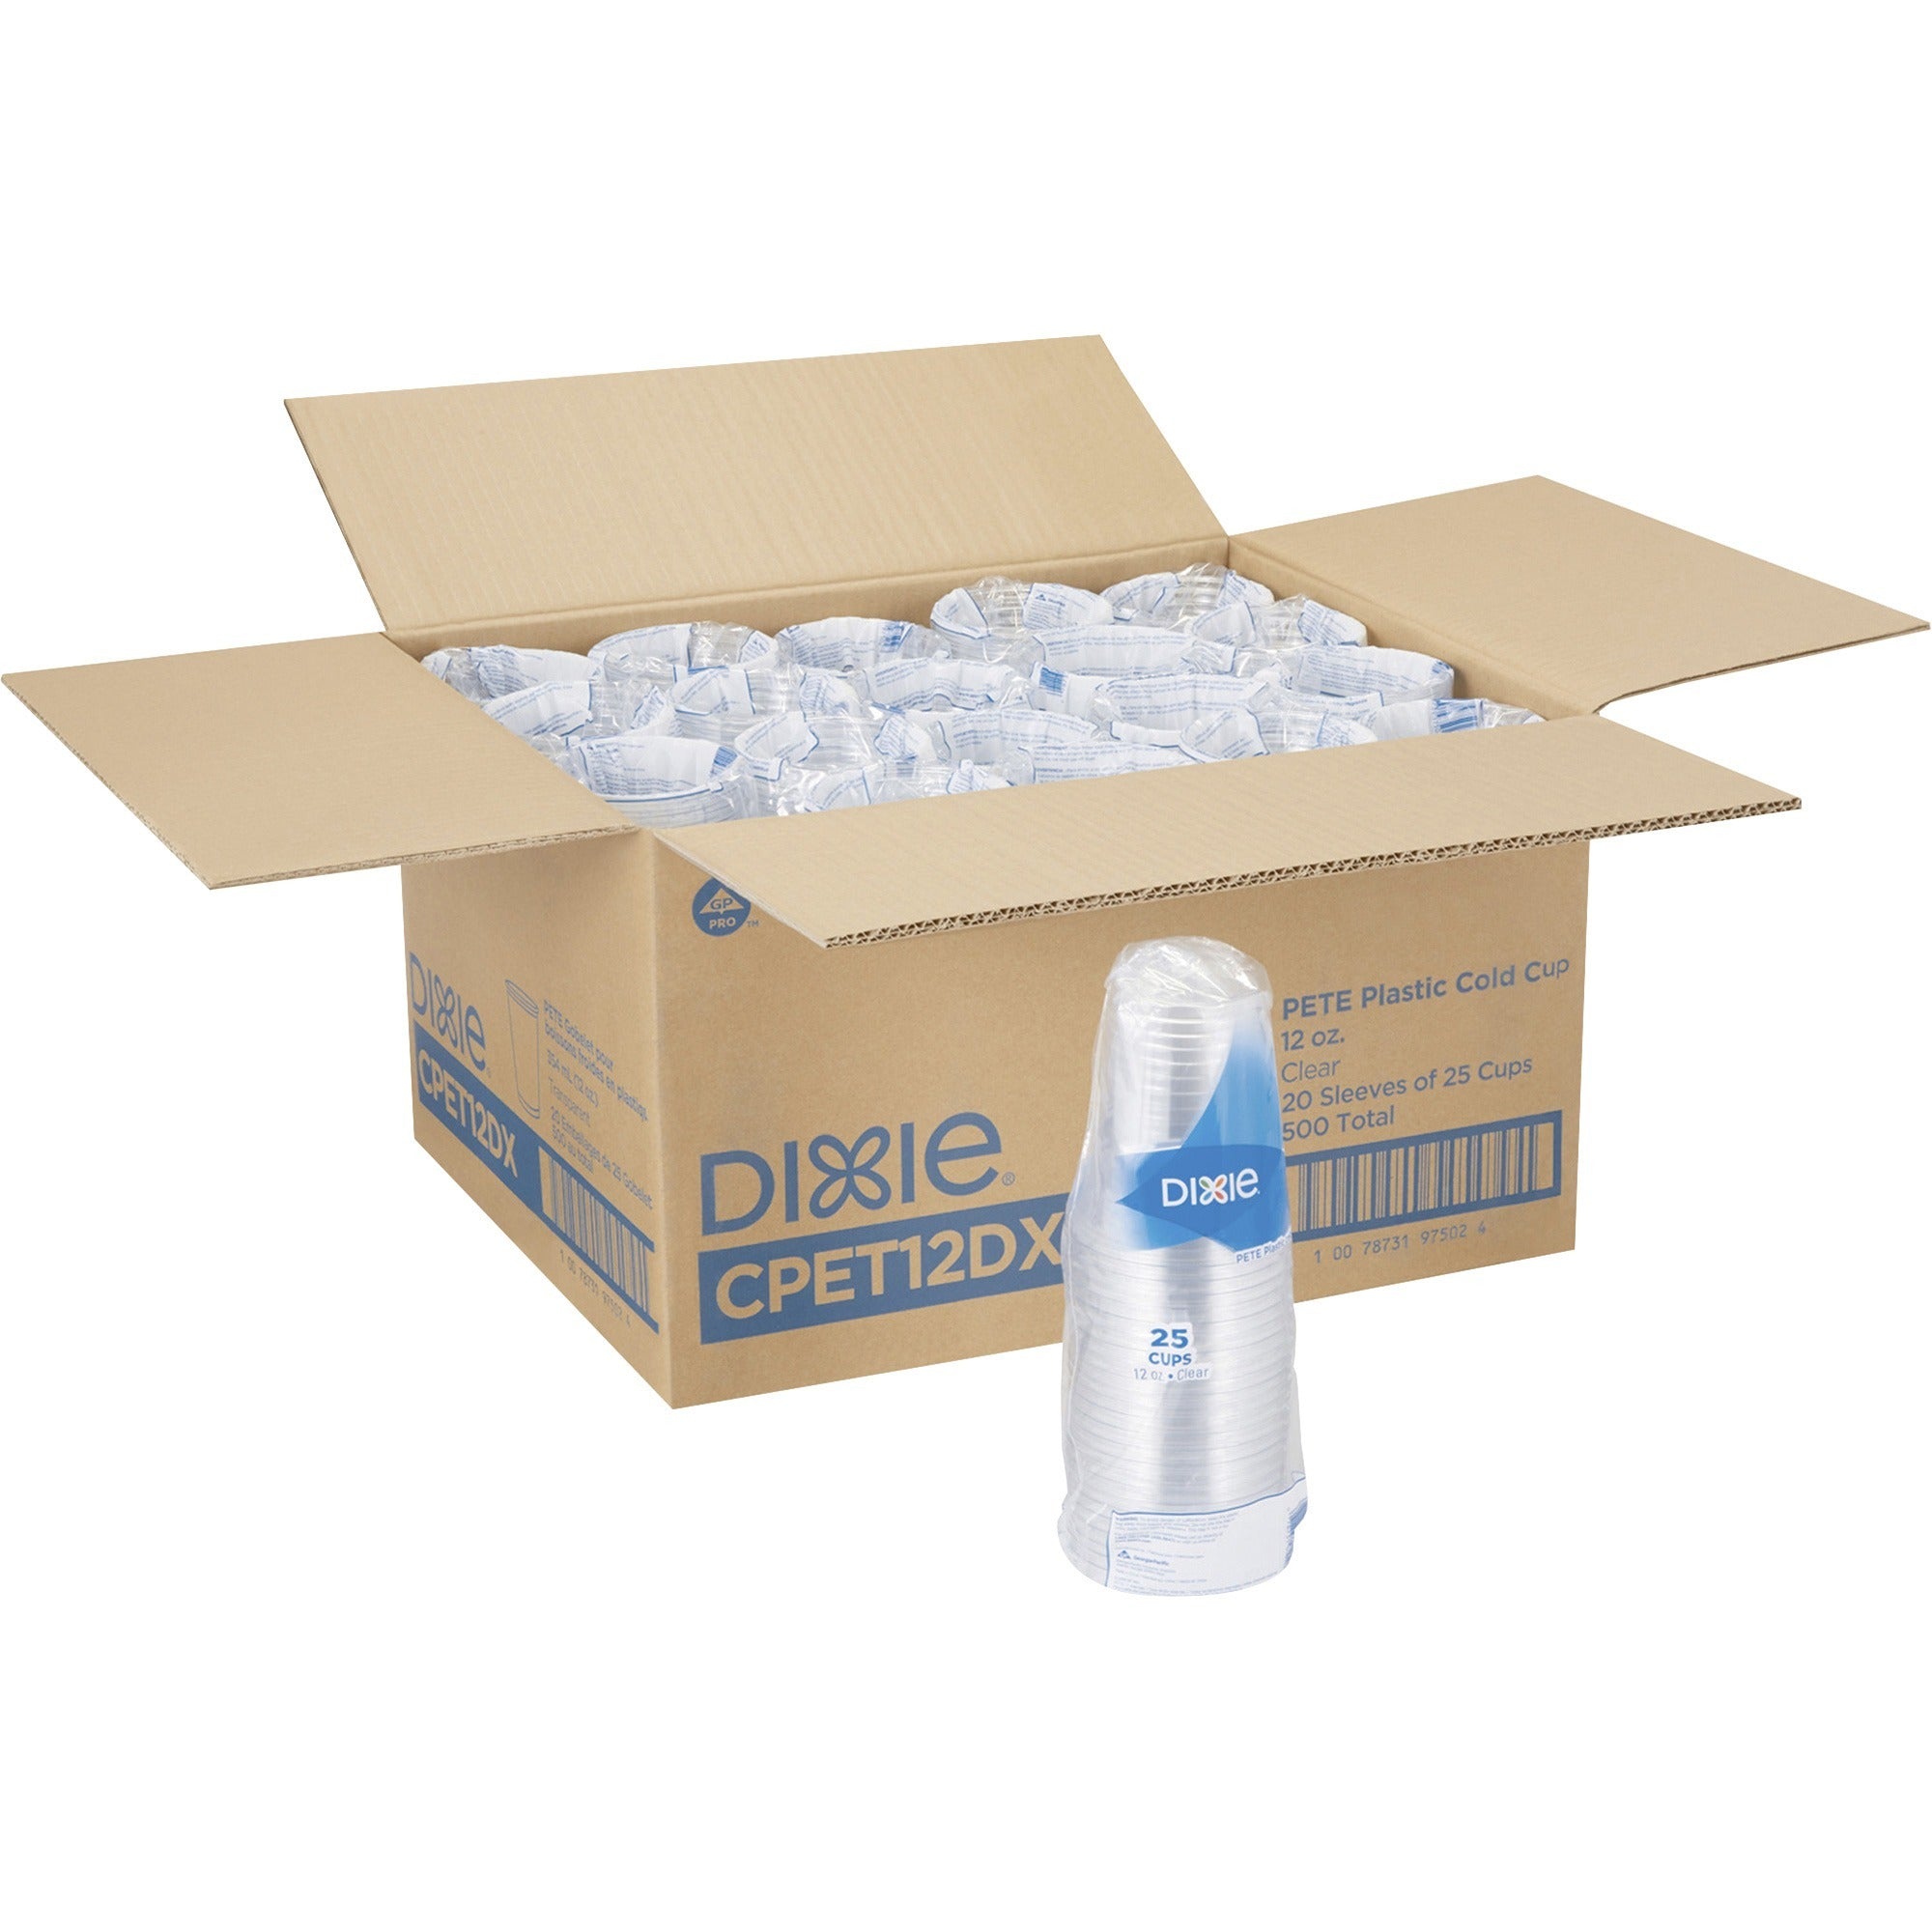 dixie-12-oz-cold-cups-by-gp-pro-25-pack-20-carton-clear-pete-plastic-coffee-shop-soda-sample-iced-coffee-restaurant-breakroom-lobby-cold-drink-beverage_dxecpet12dxct - 1